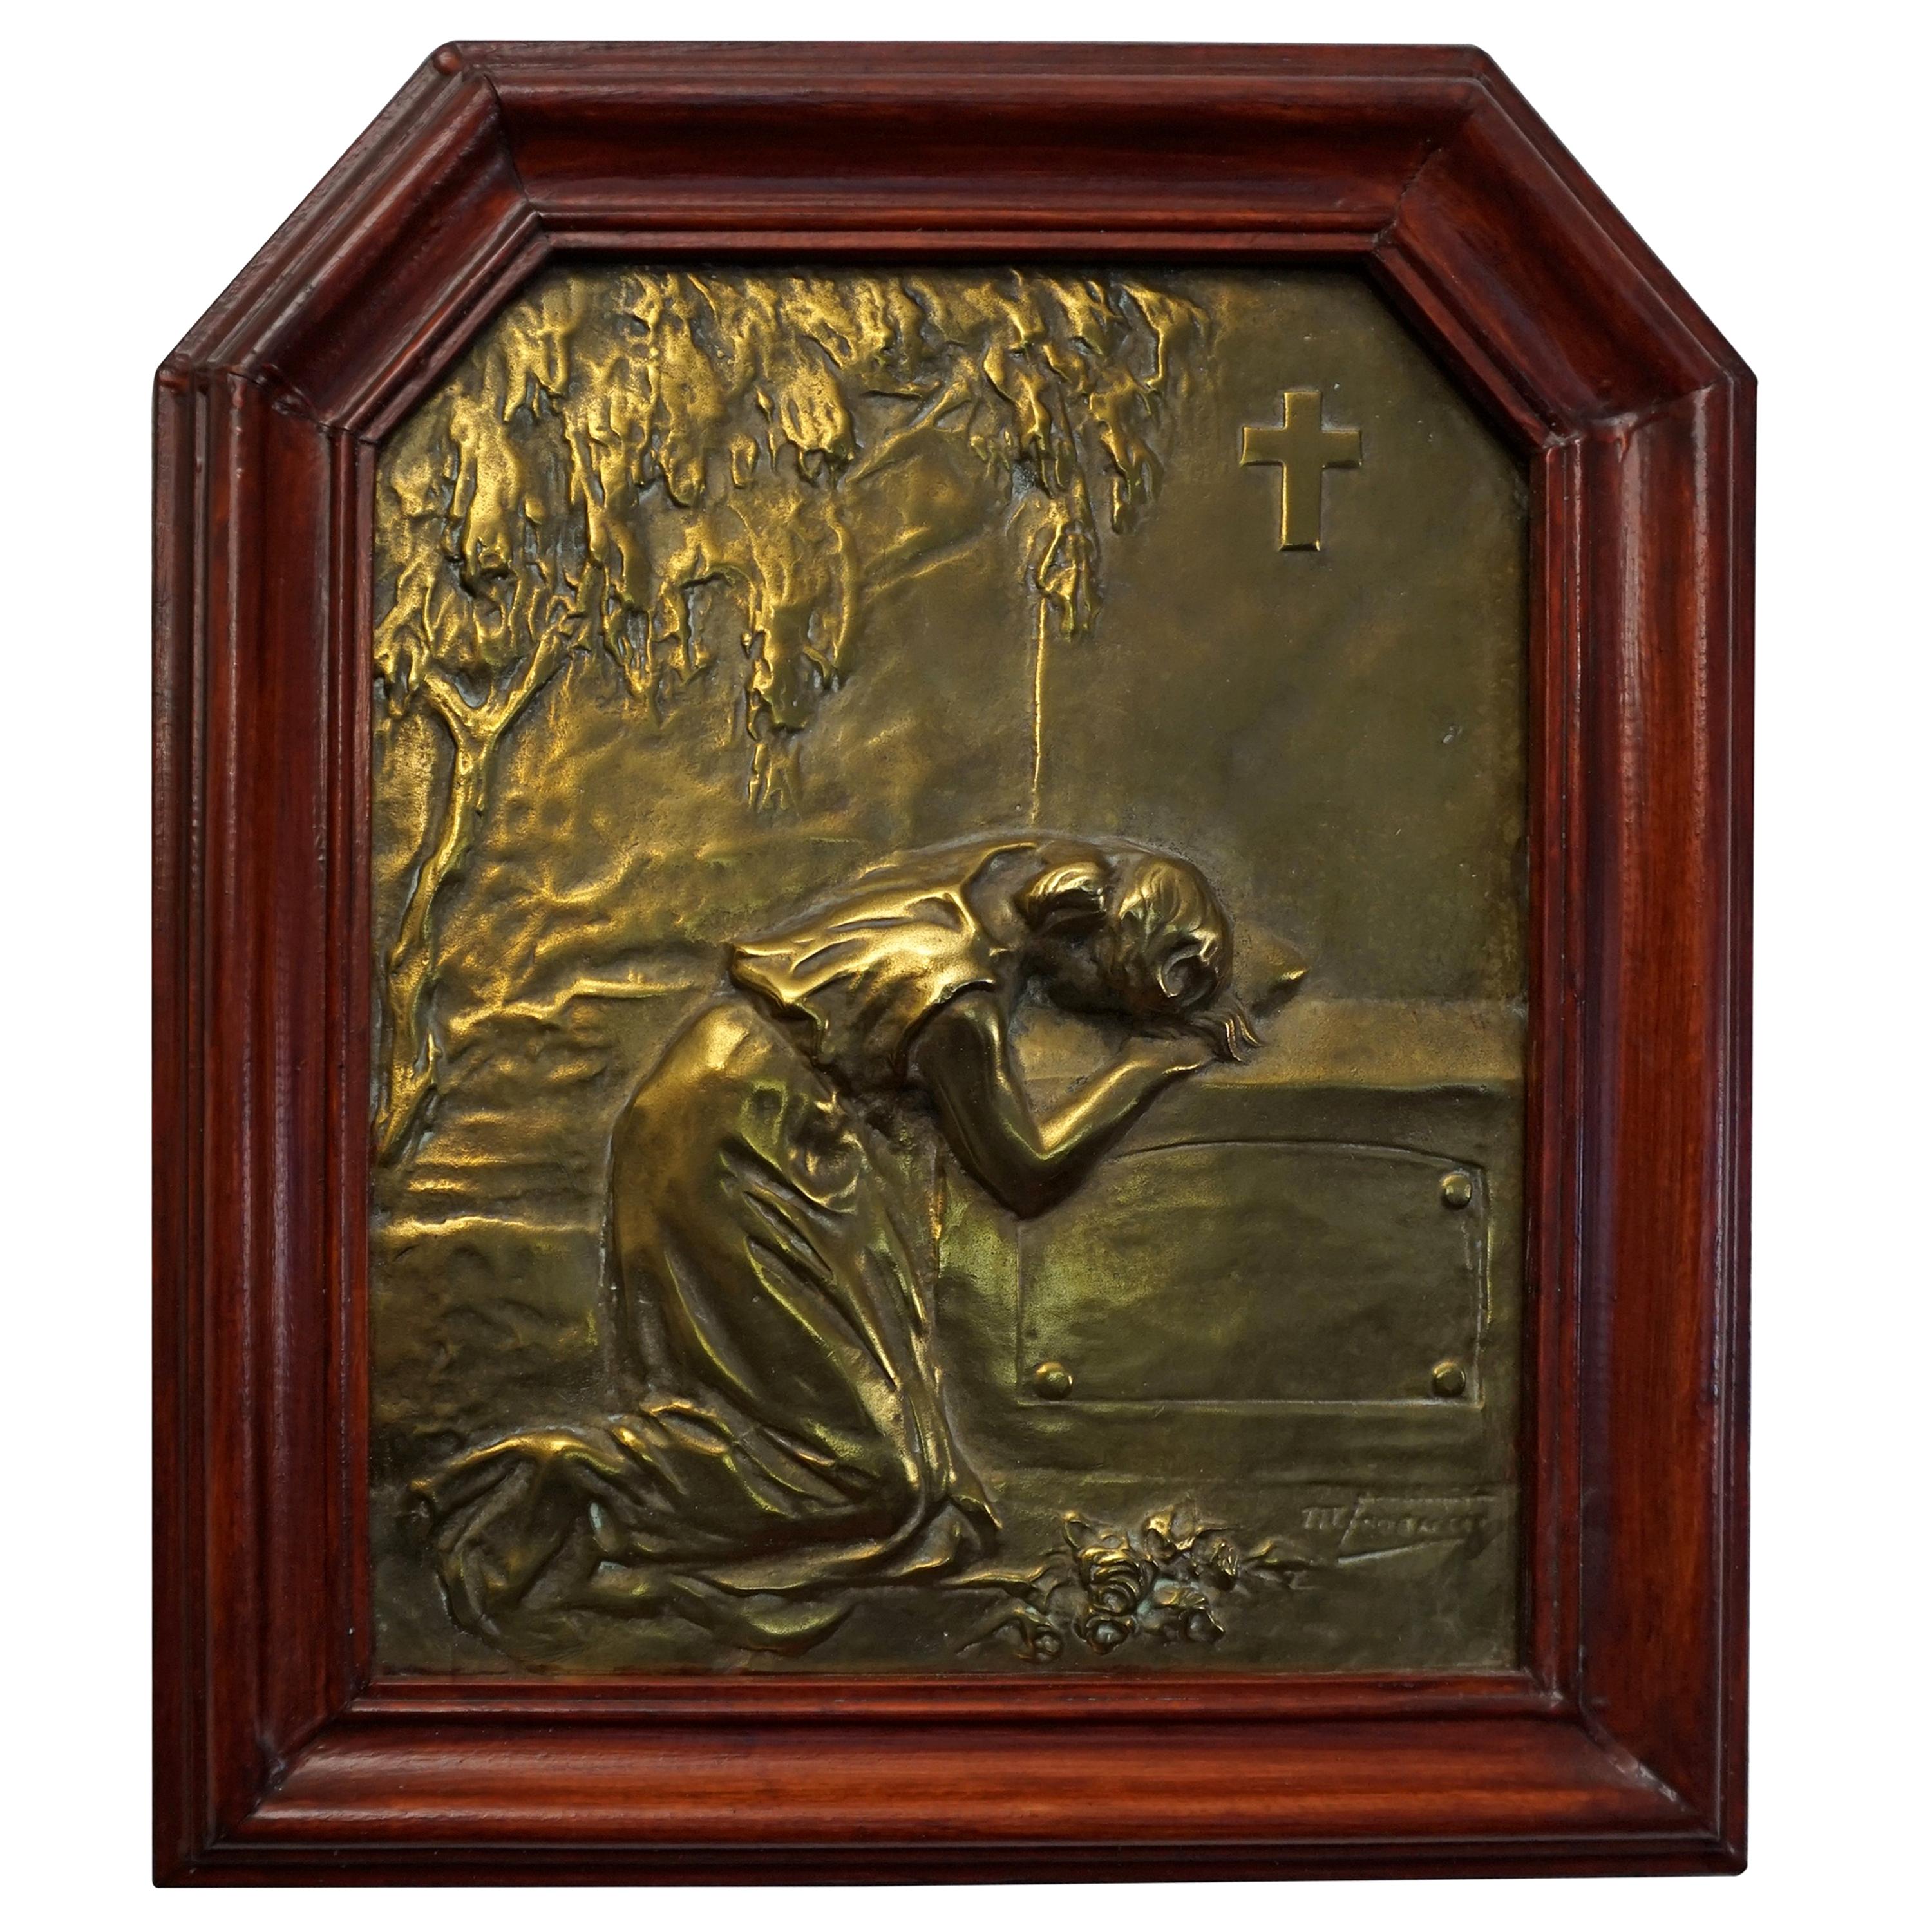 Art Nouveau Bronze or Bronzed Wall Plaque of Lady Mourning by a Grave circa 1900